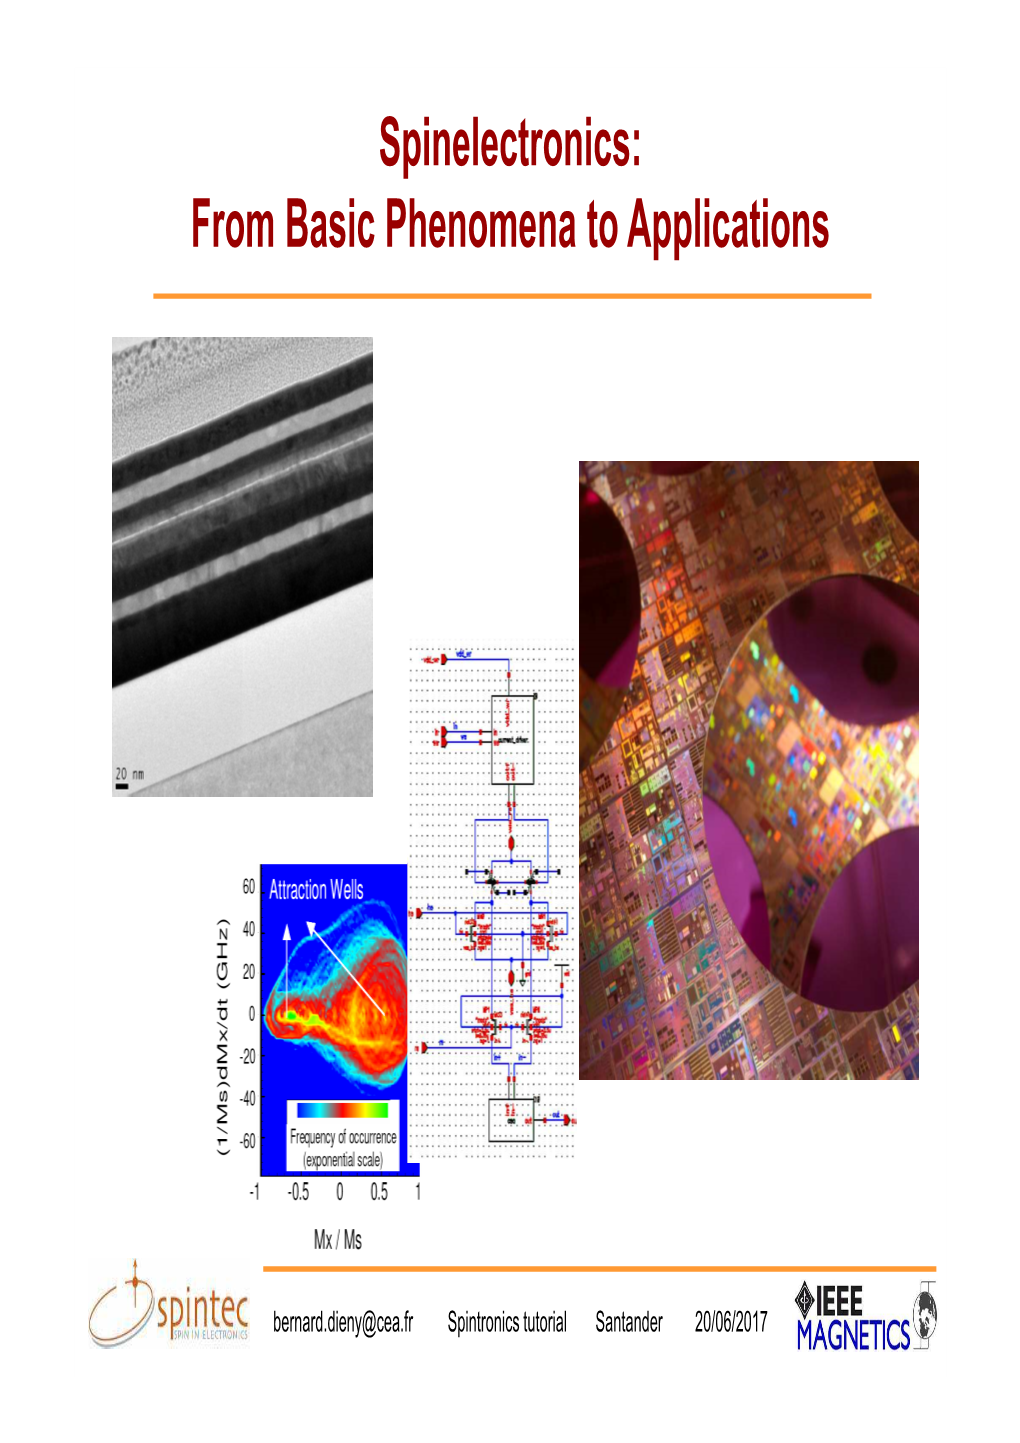 Spinelectronics: from Basic Phenomena to Applications